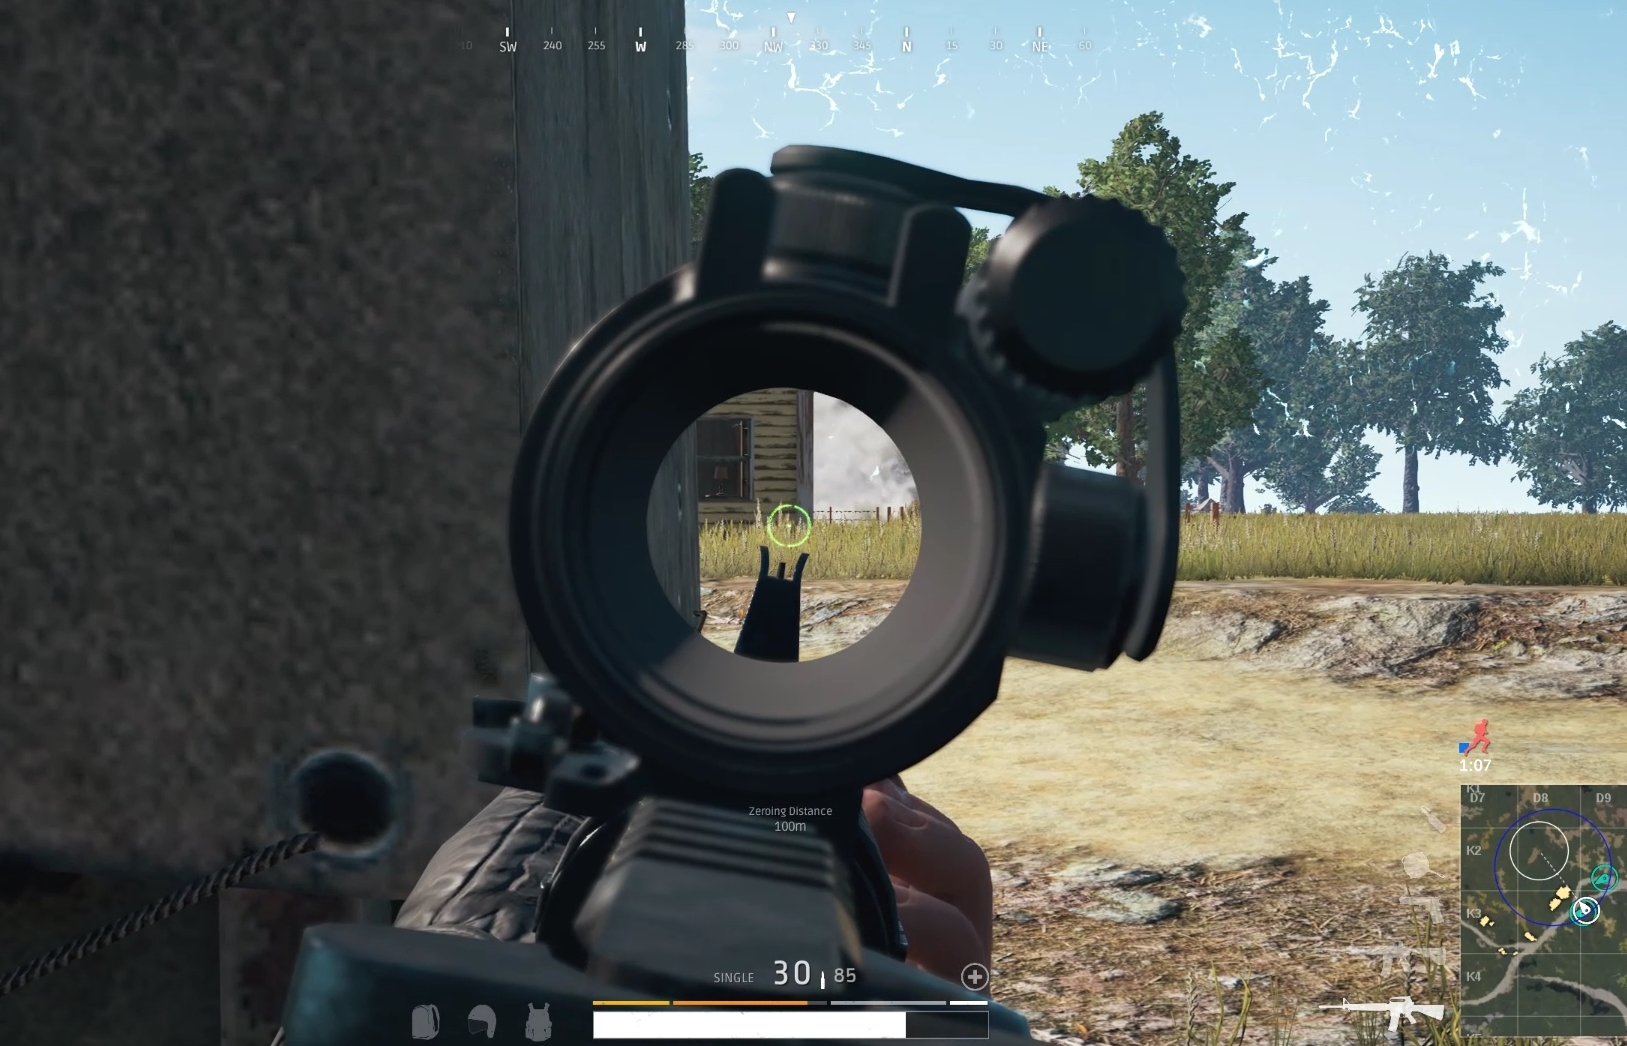 player unknown battlegrounds pc first person